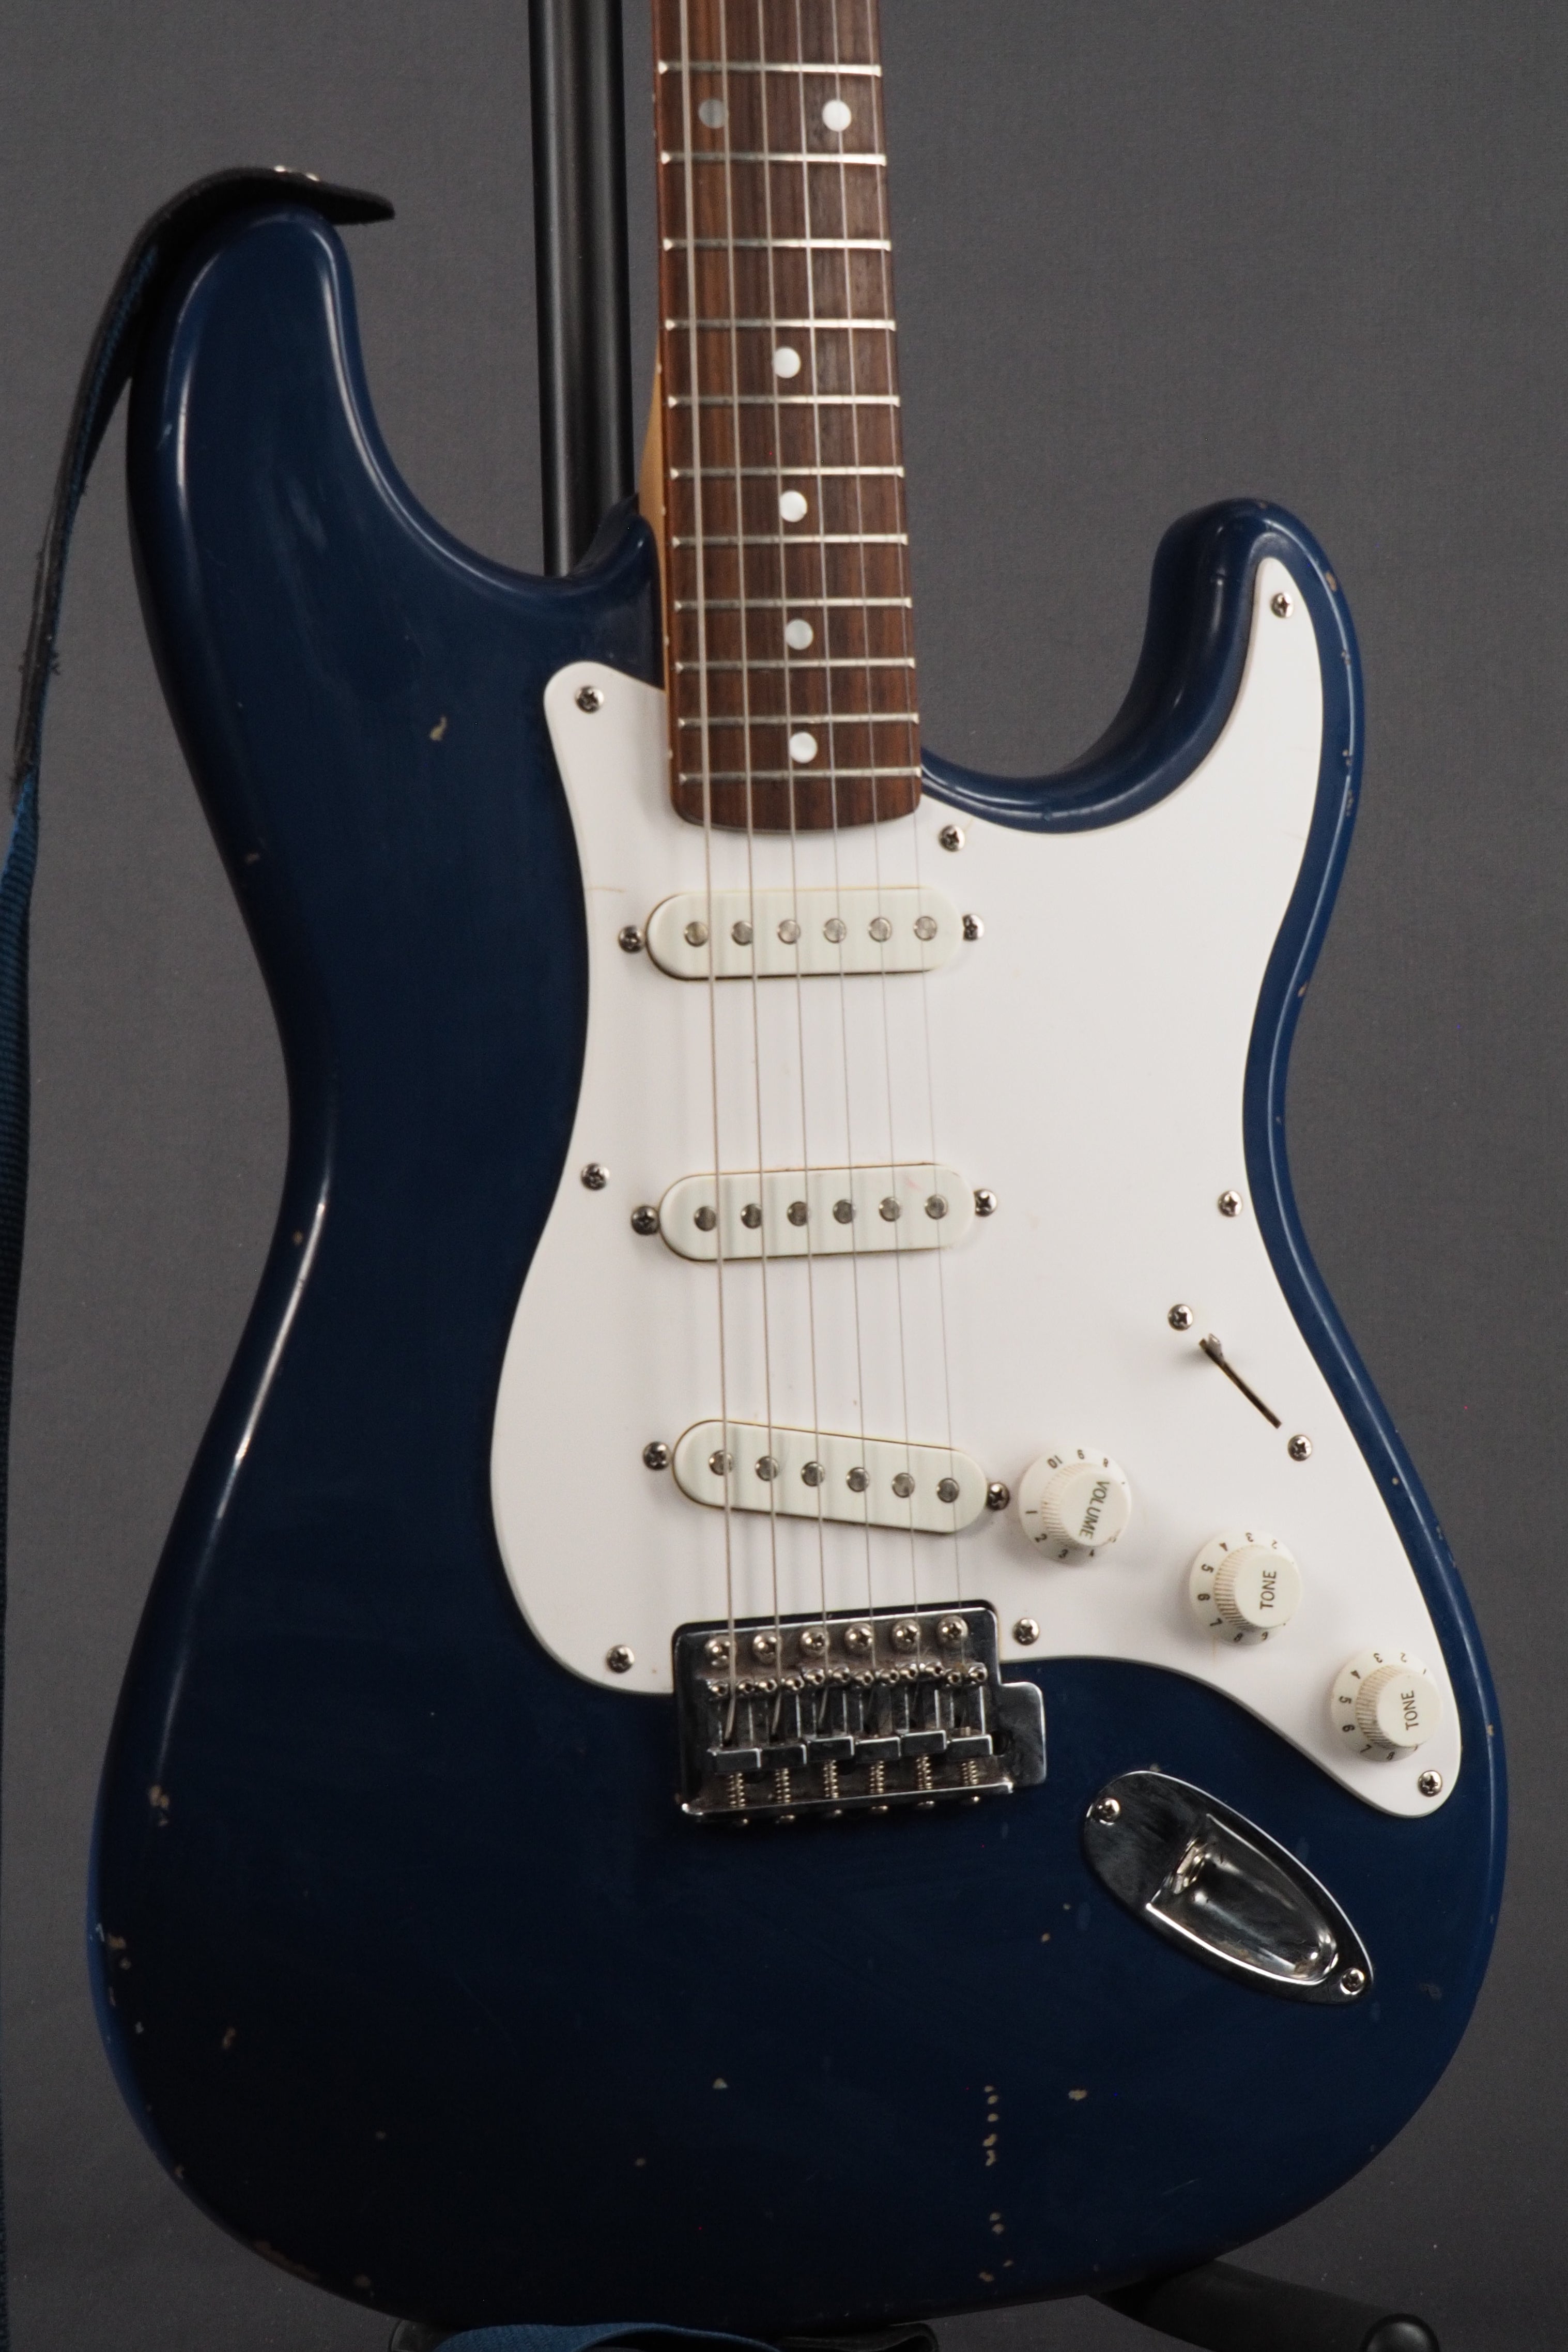 Squier Affinity Stratocaster - Navy Blue - In-Store Pickup Only